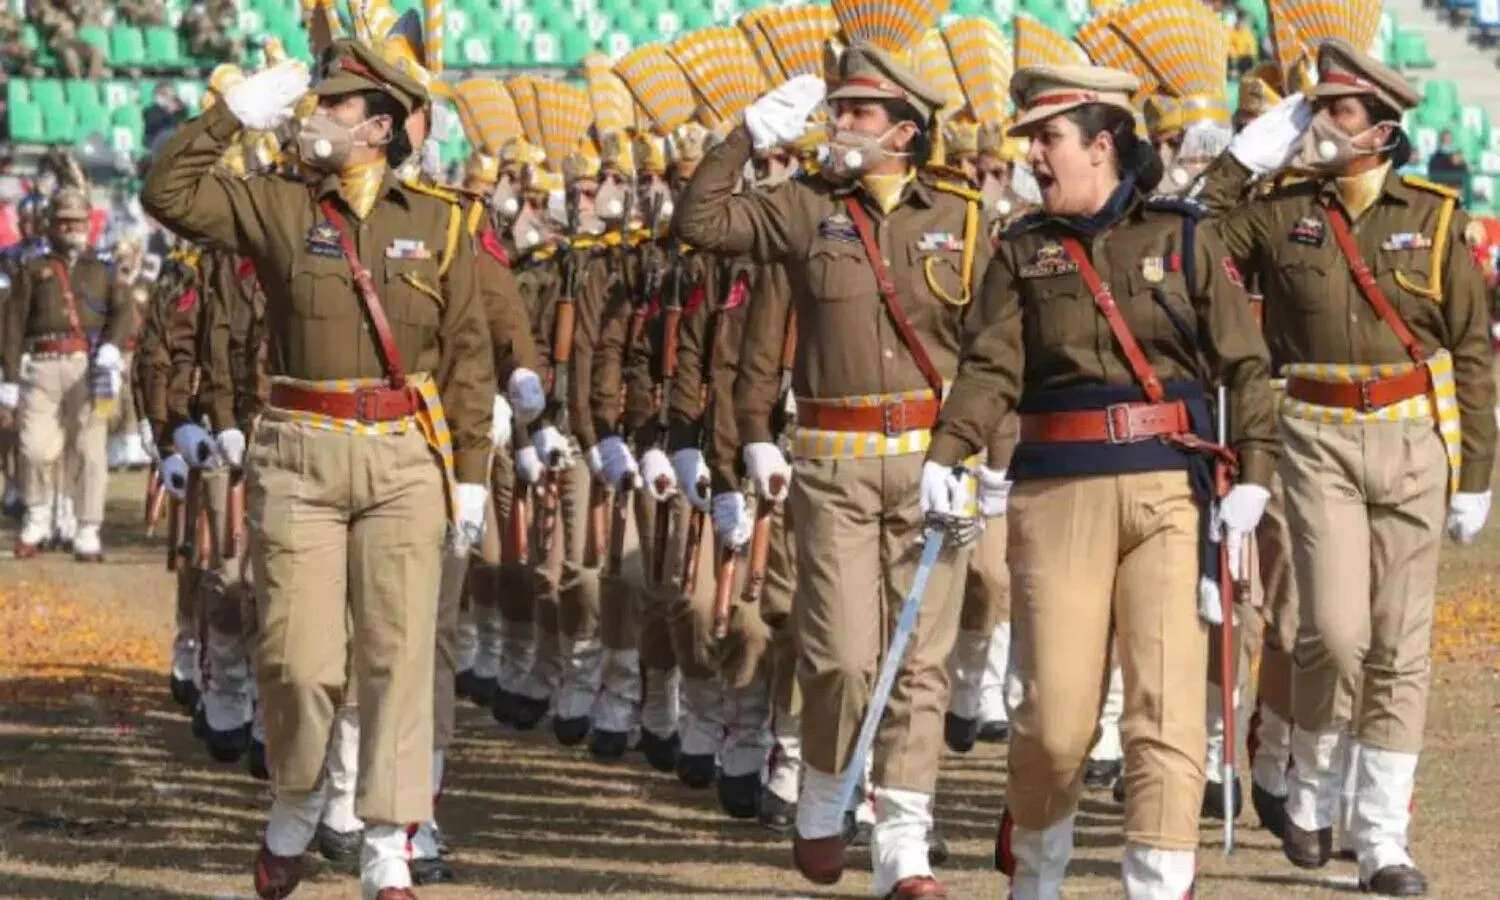 Selection of Women Police Officers